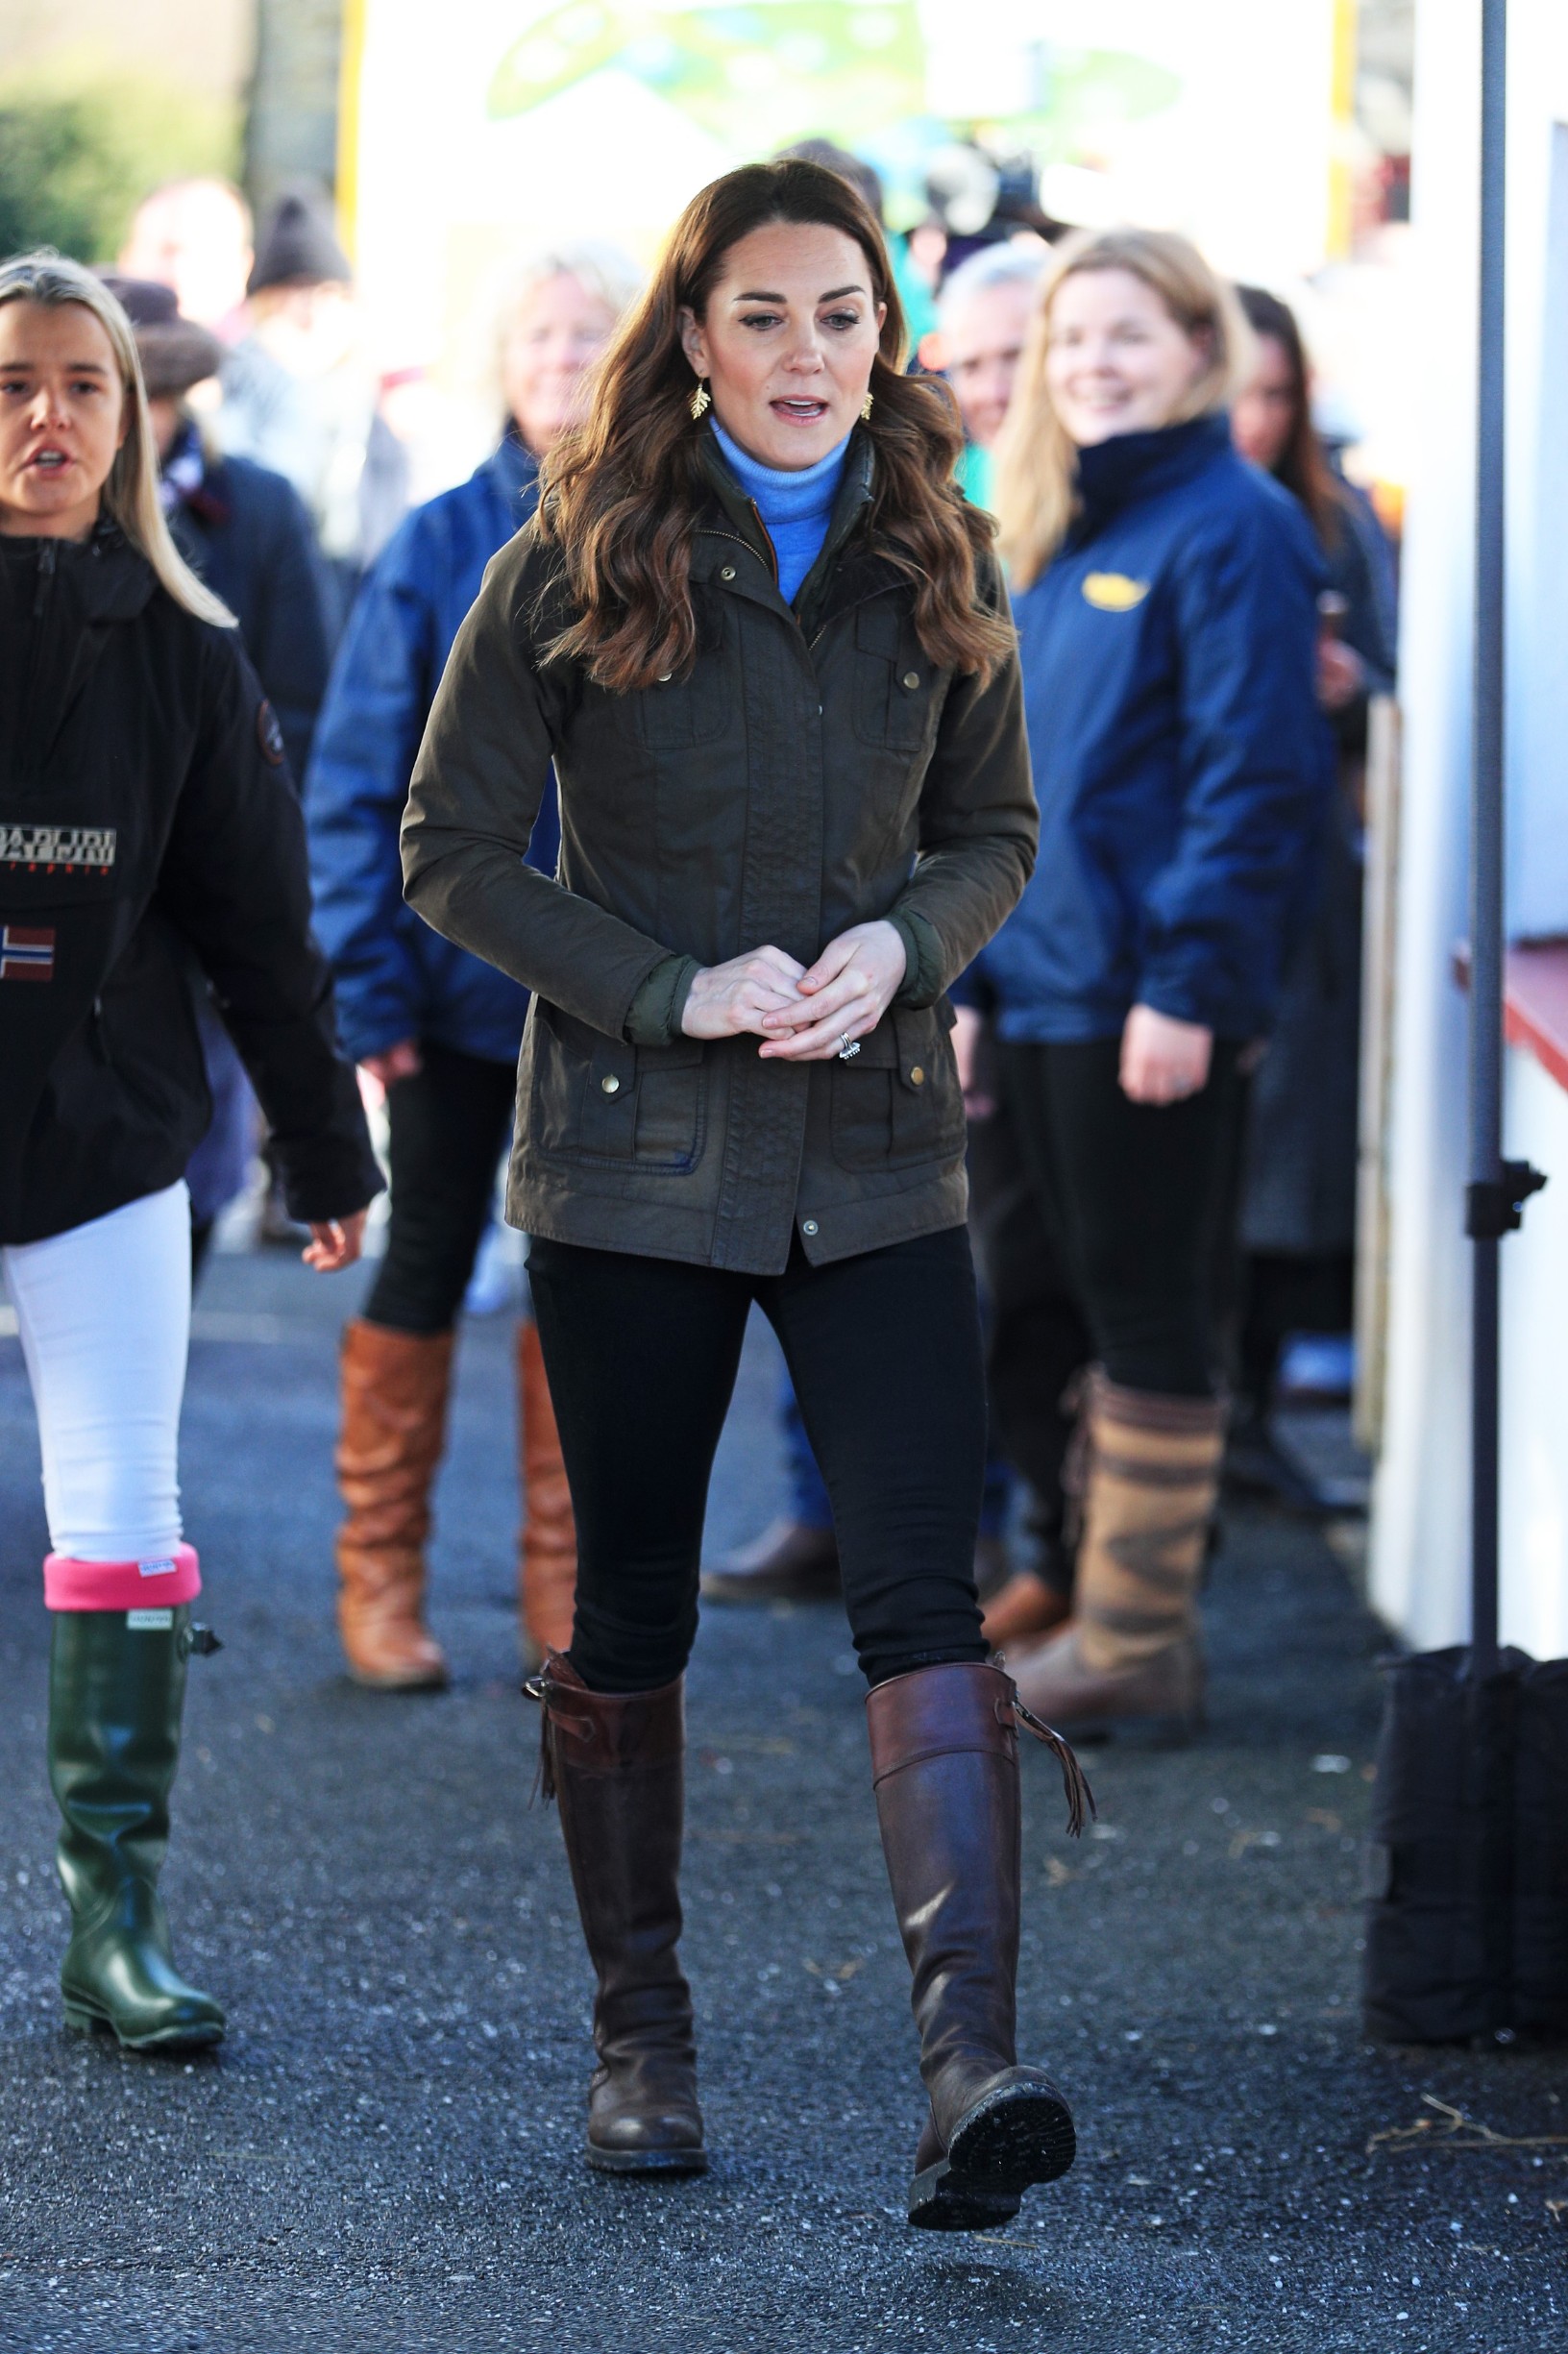 The Duchess of Cambridge during a visit to the Ark Open Farm, in Newtownards, near Belfast, during a visit to meet with parents and grandparents to discuss their experiences of raising young children for her Early Childhood survey.,Image: 498056780, License: Rights-managed, Restrictions: , Model Release: no, Credit line: Peter Byrne / PA Images / Profimedia